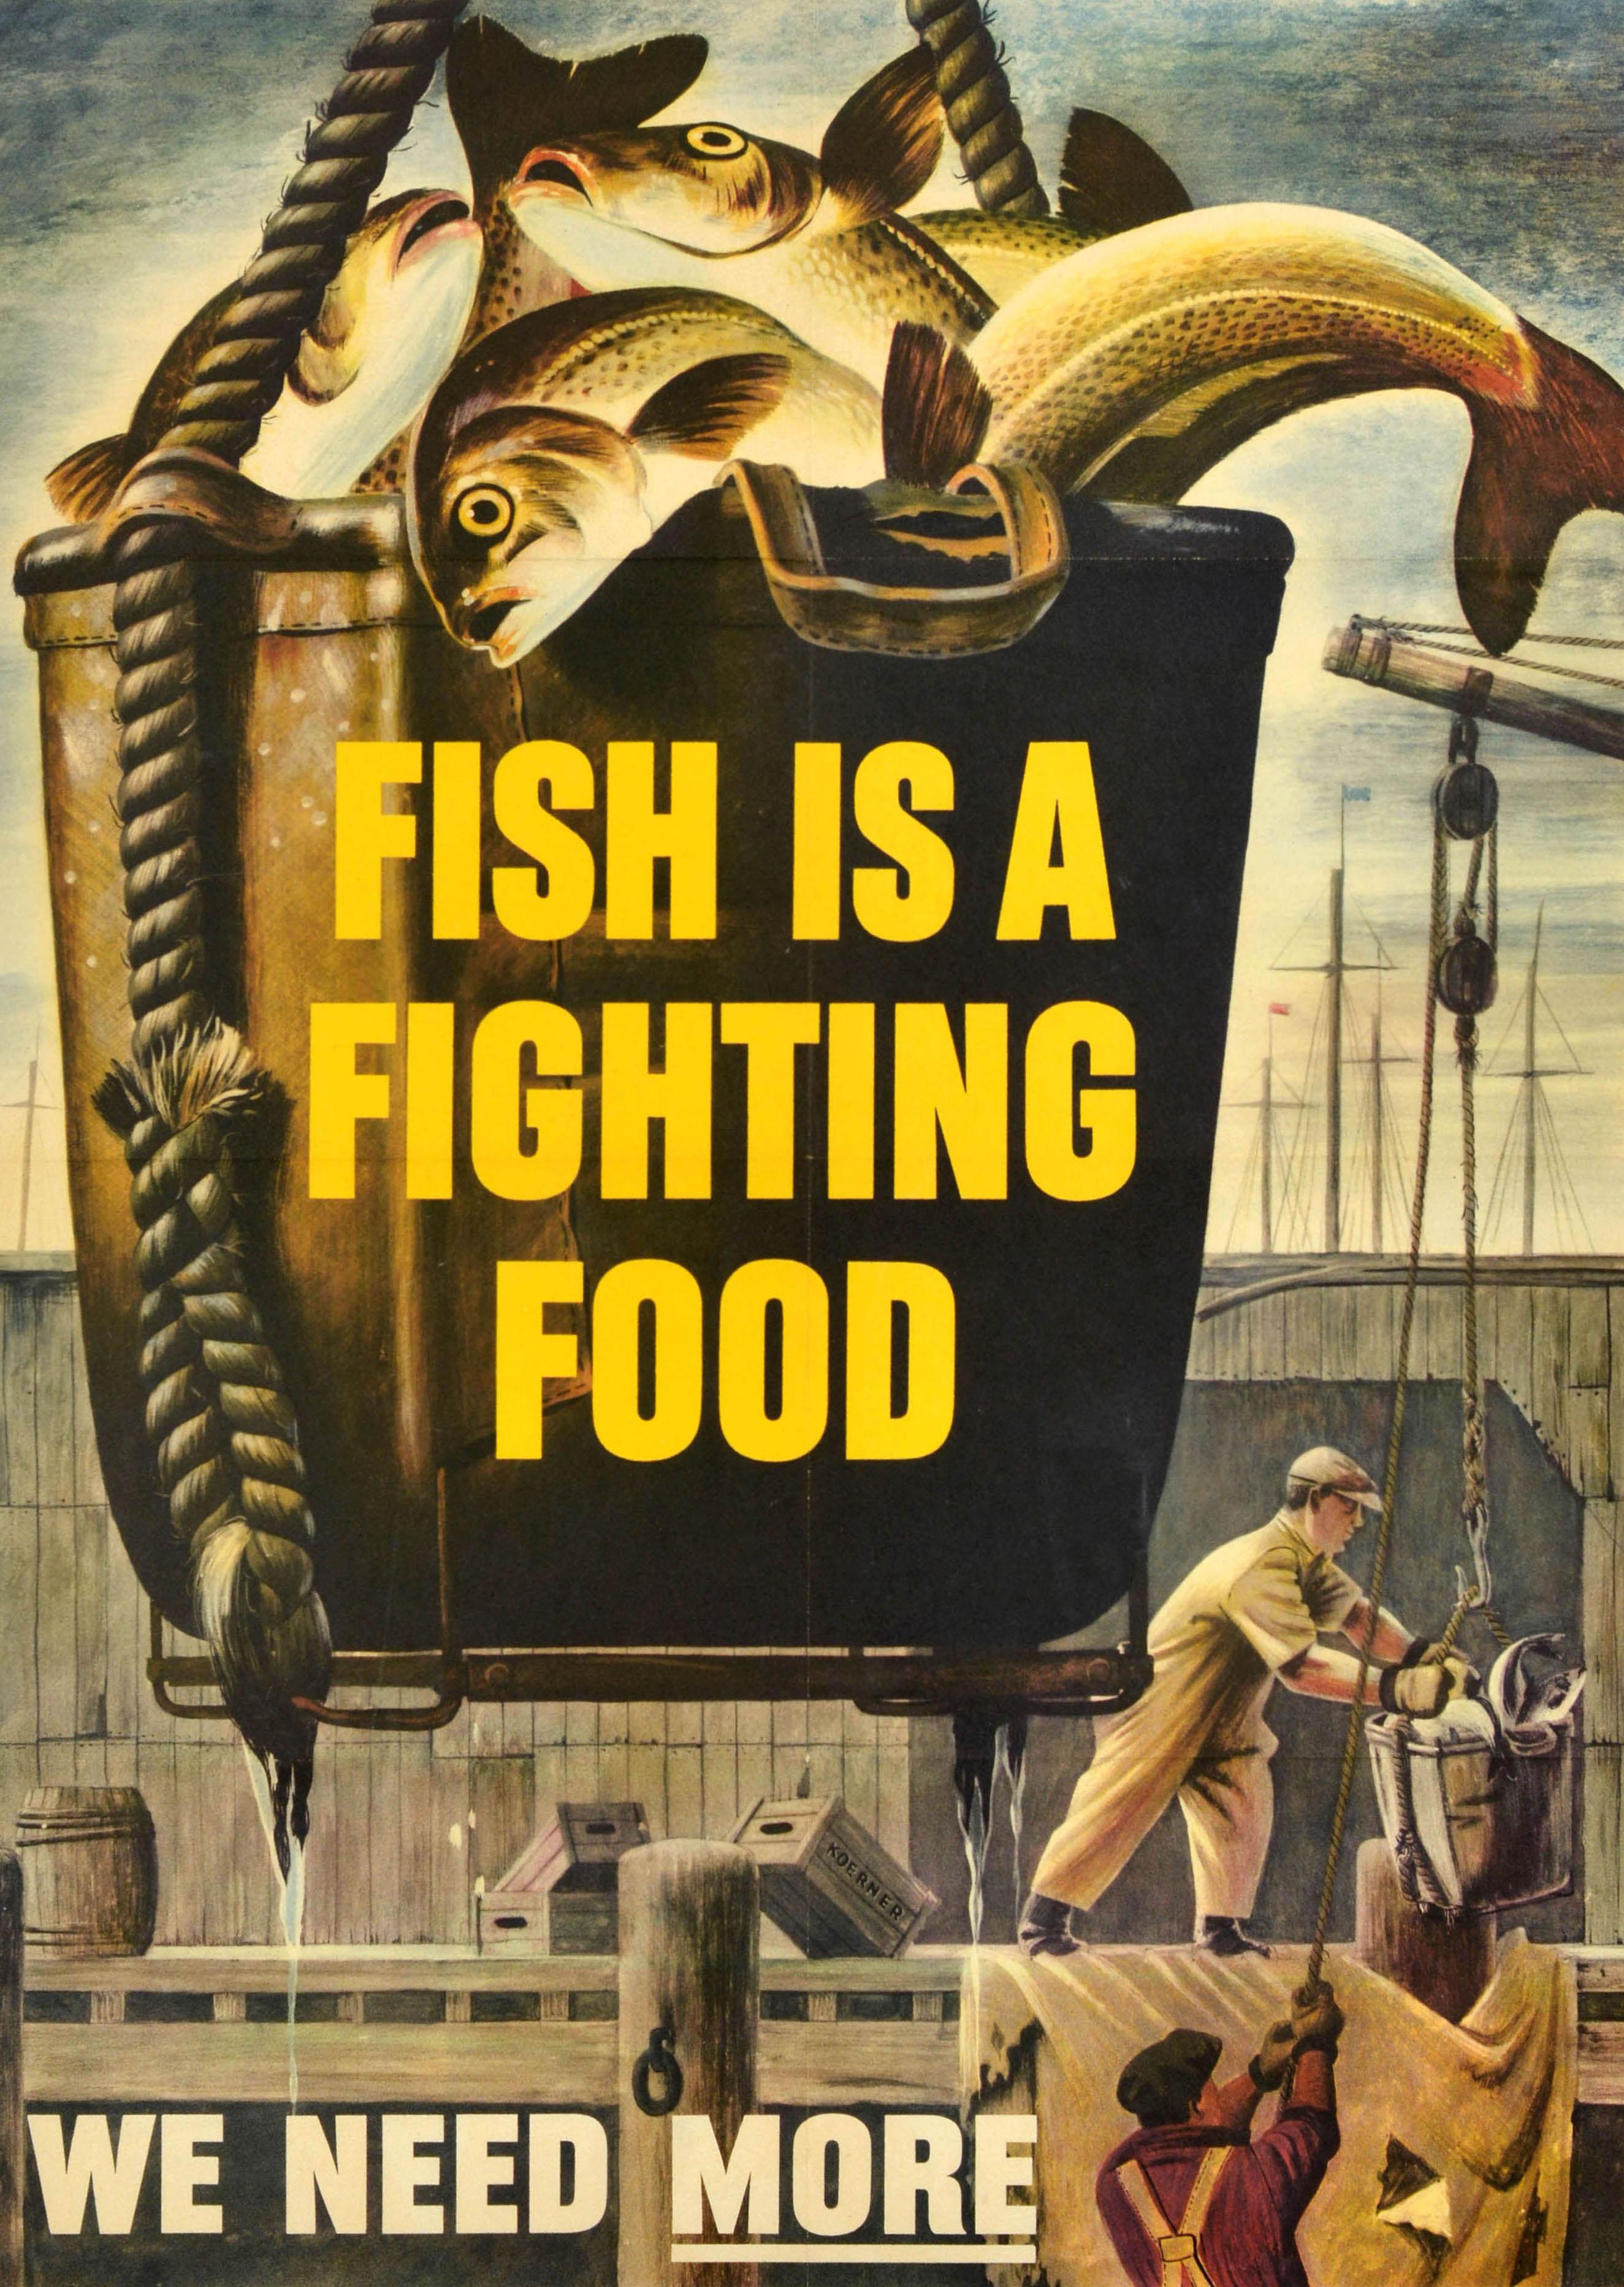 Original Vintage War Home Front Poster Fish Is A Fighting Food Rationing WWII - Print by Unknown